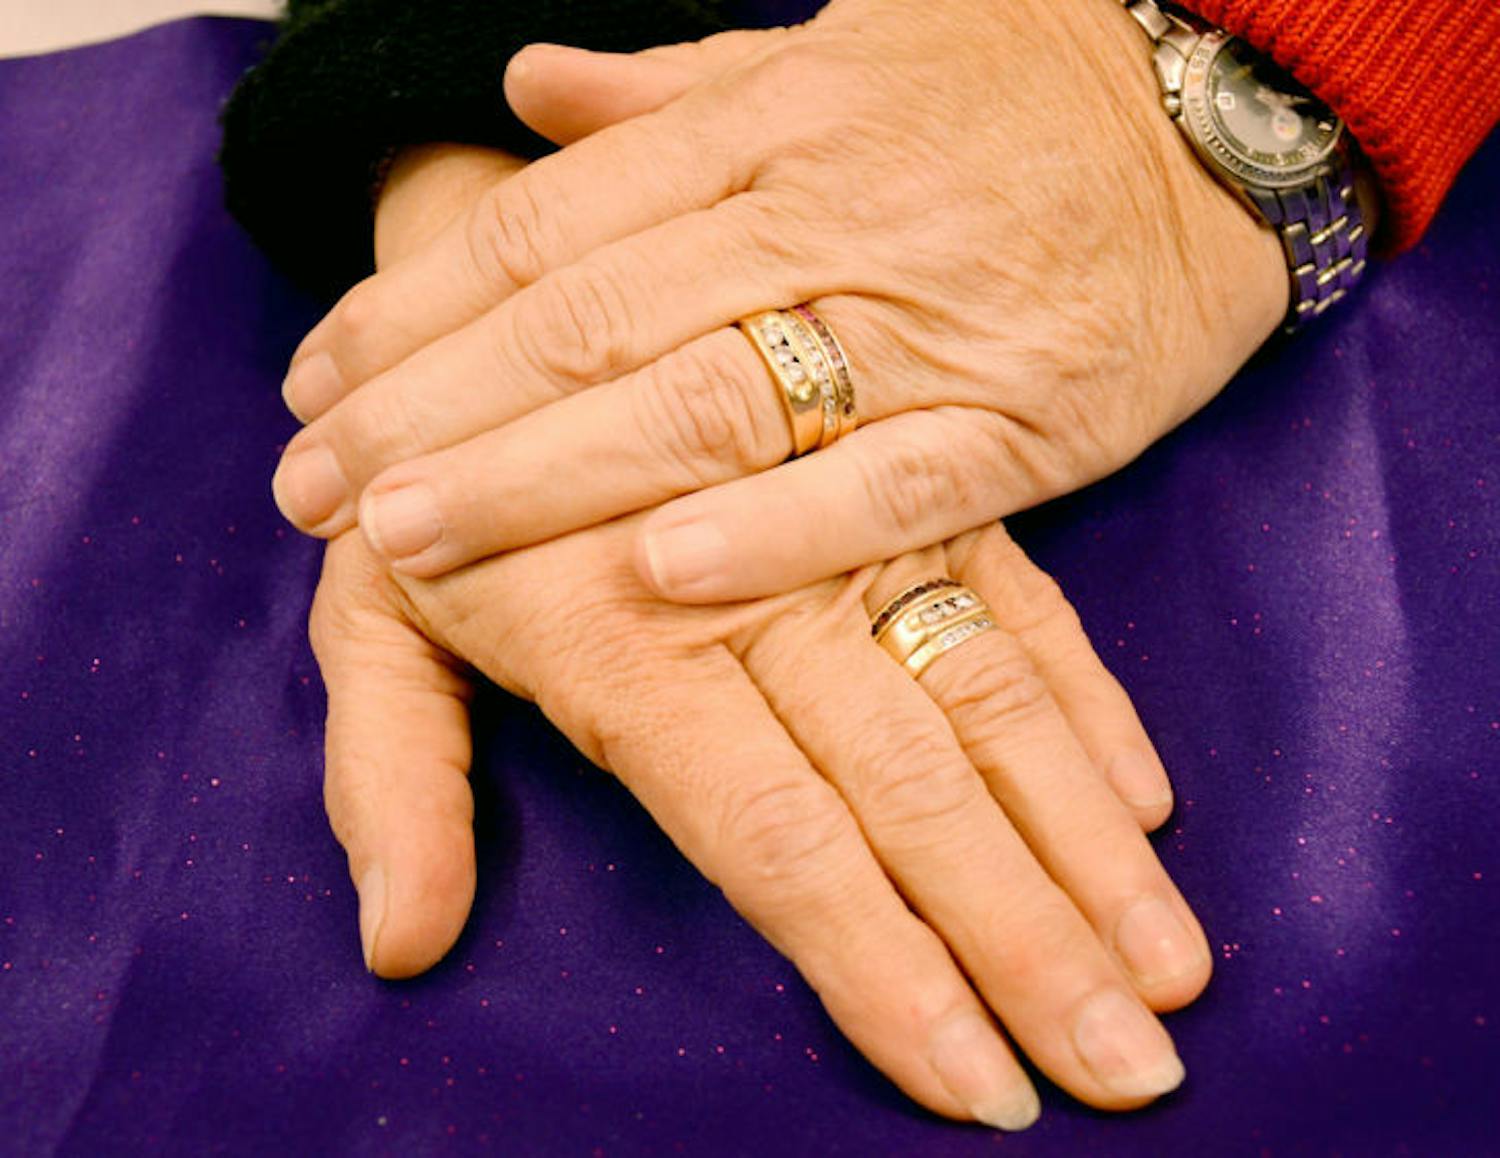 Petersen and Grimes show their rings. They received the holy union in Minnesota in October 1990.